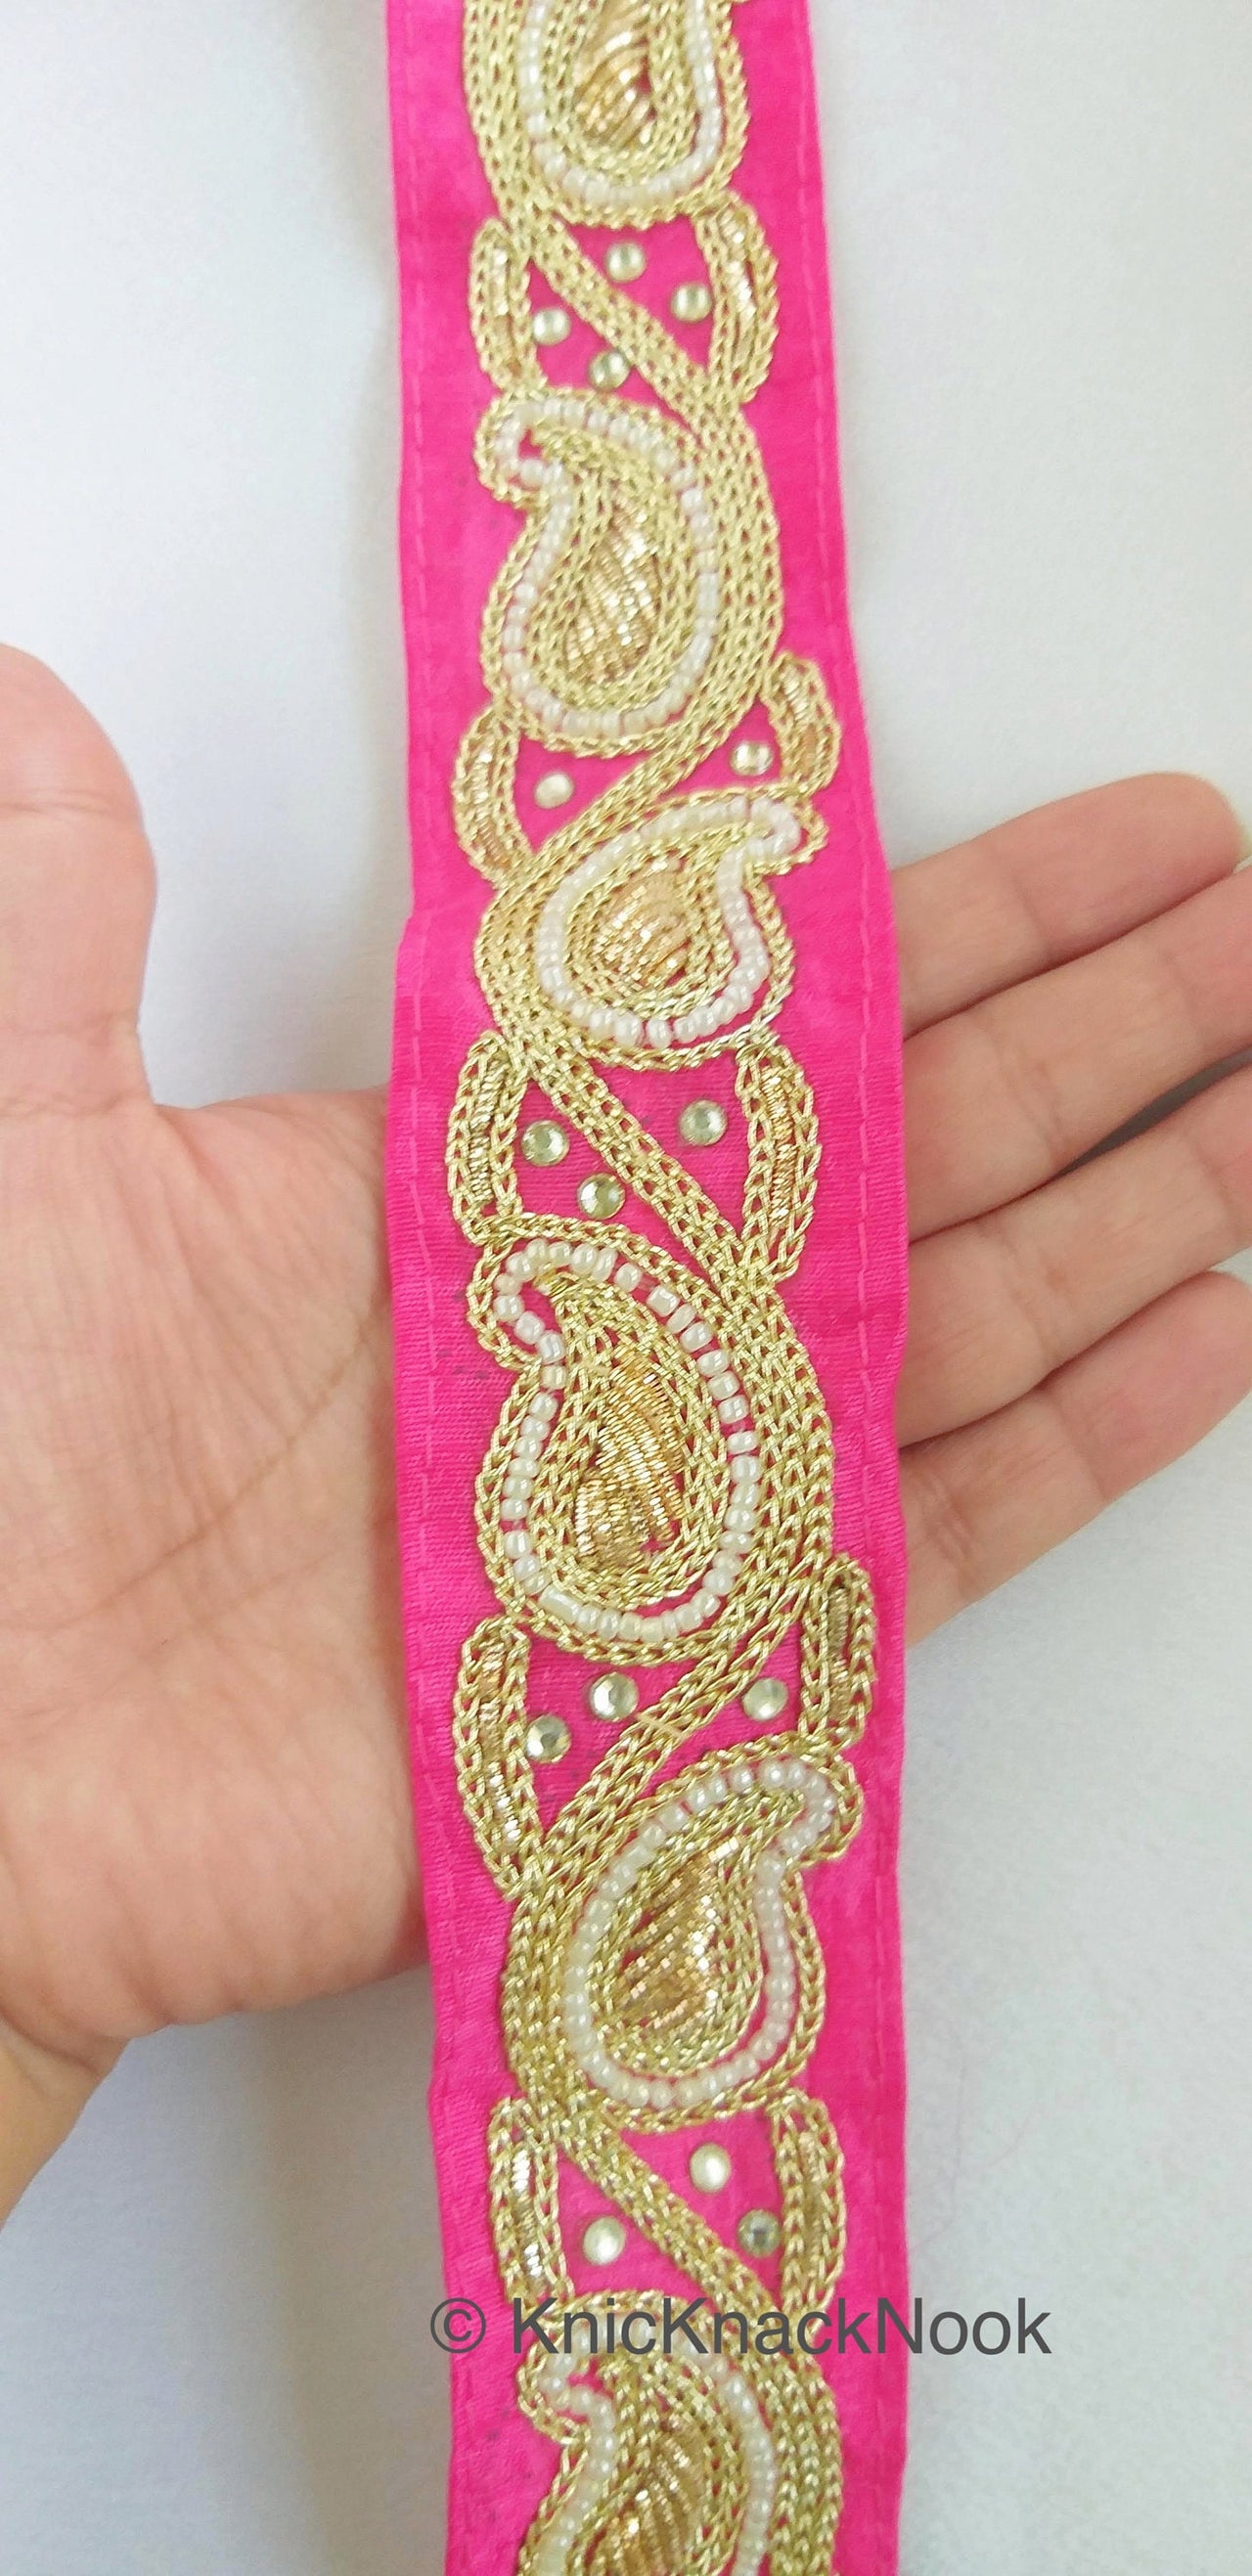 Pink Lace Trim With Floral Zardozi Hand Embroidery And White Beads & Indian Stones Kundan Embellishment, Approx. 40mm, Decorative Trim